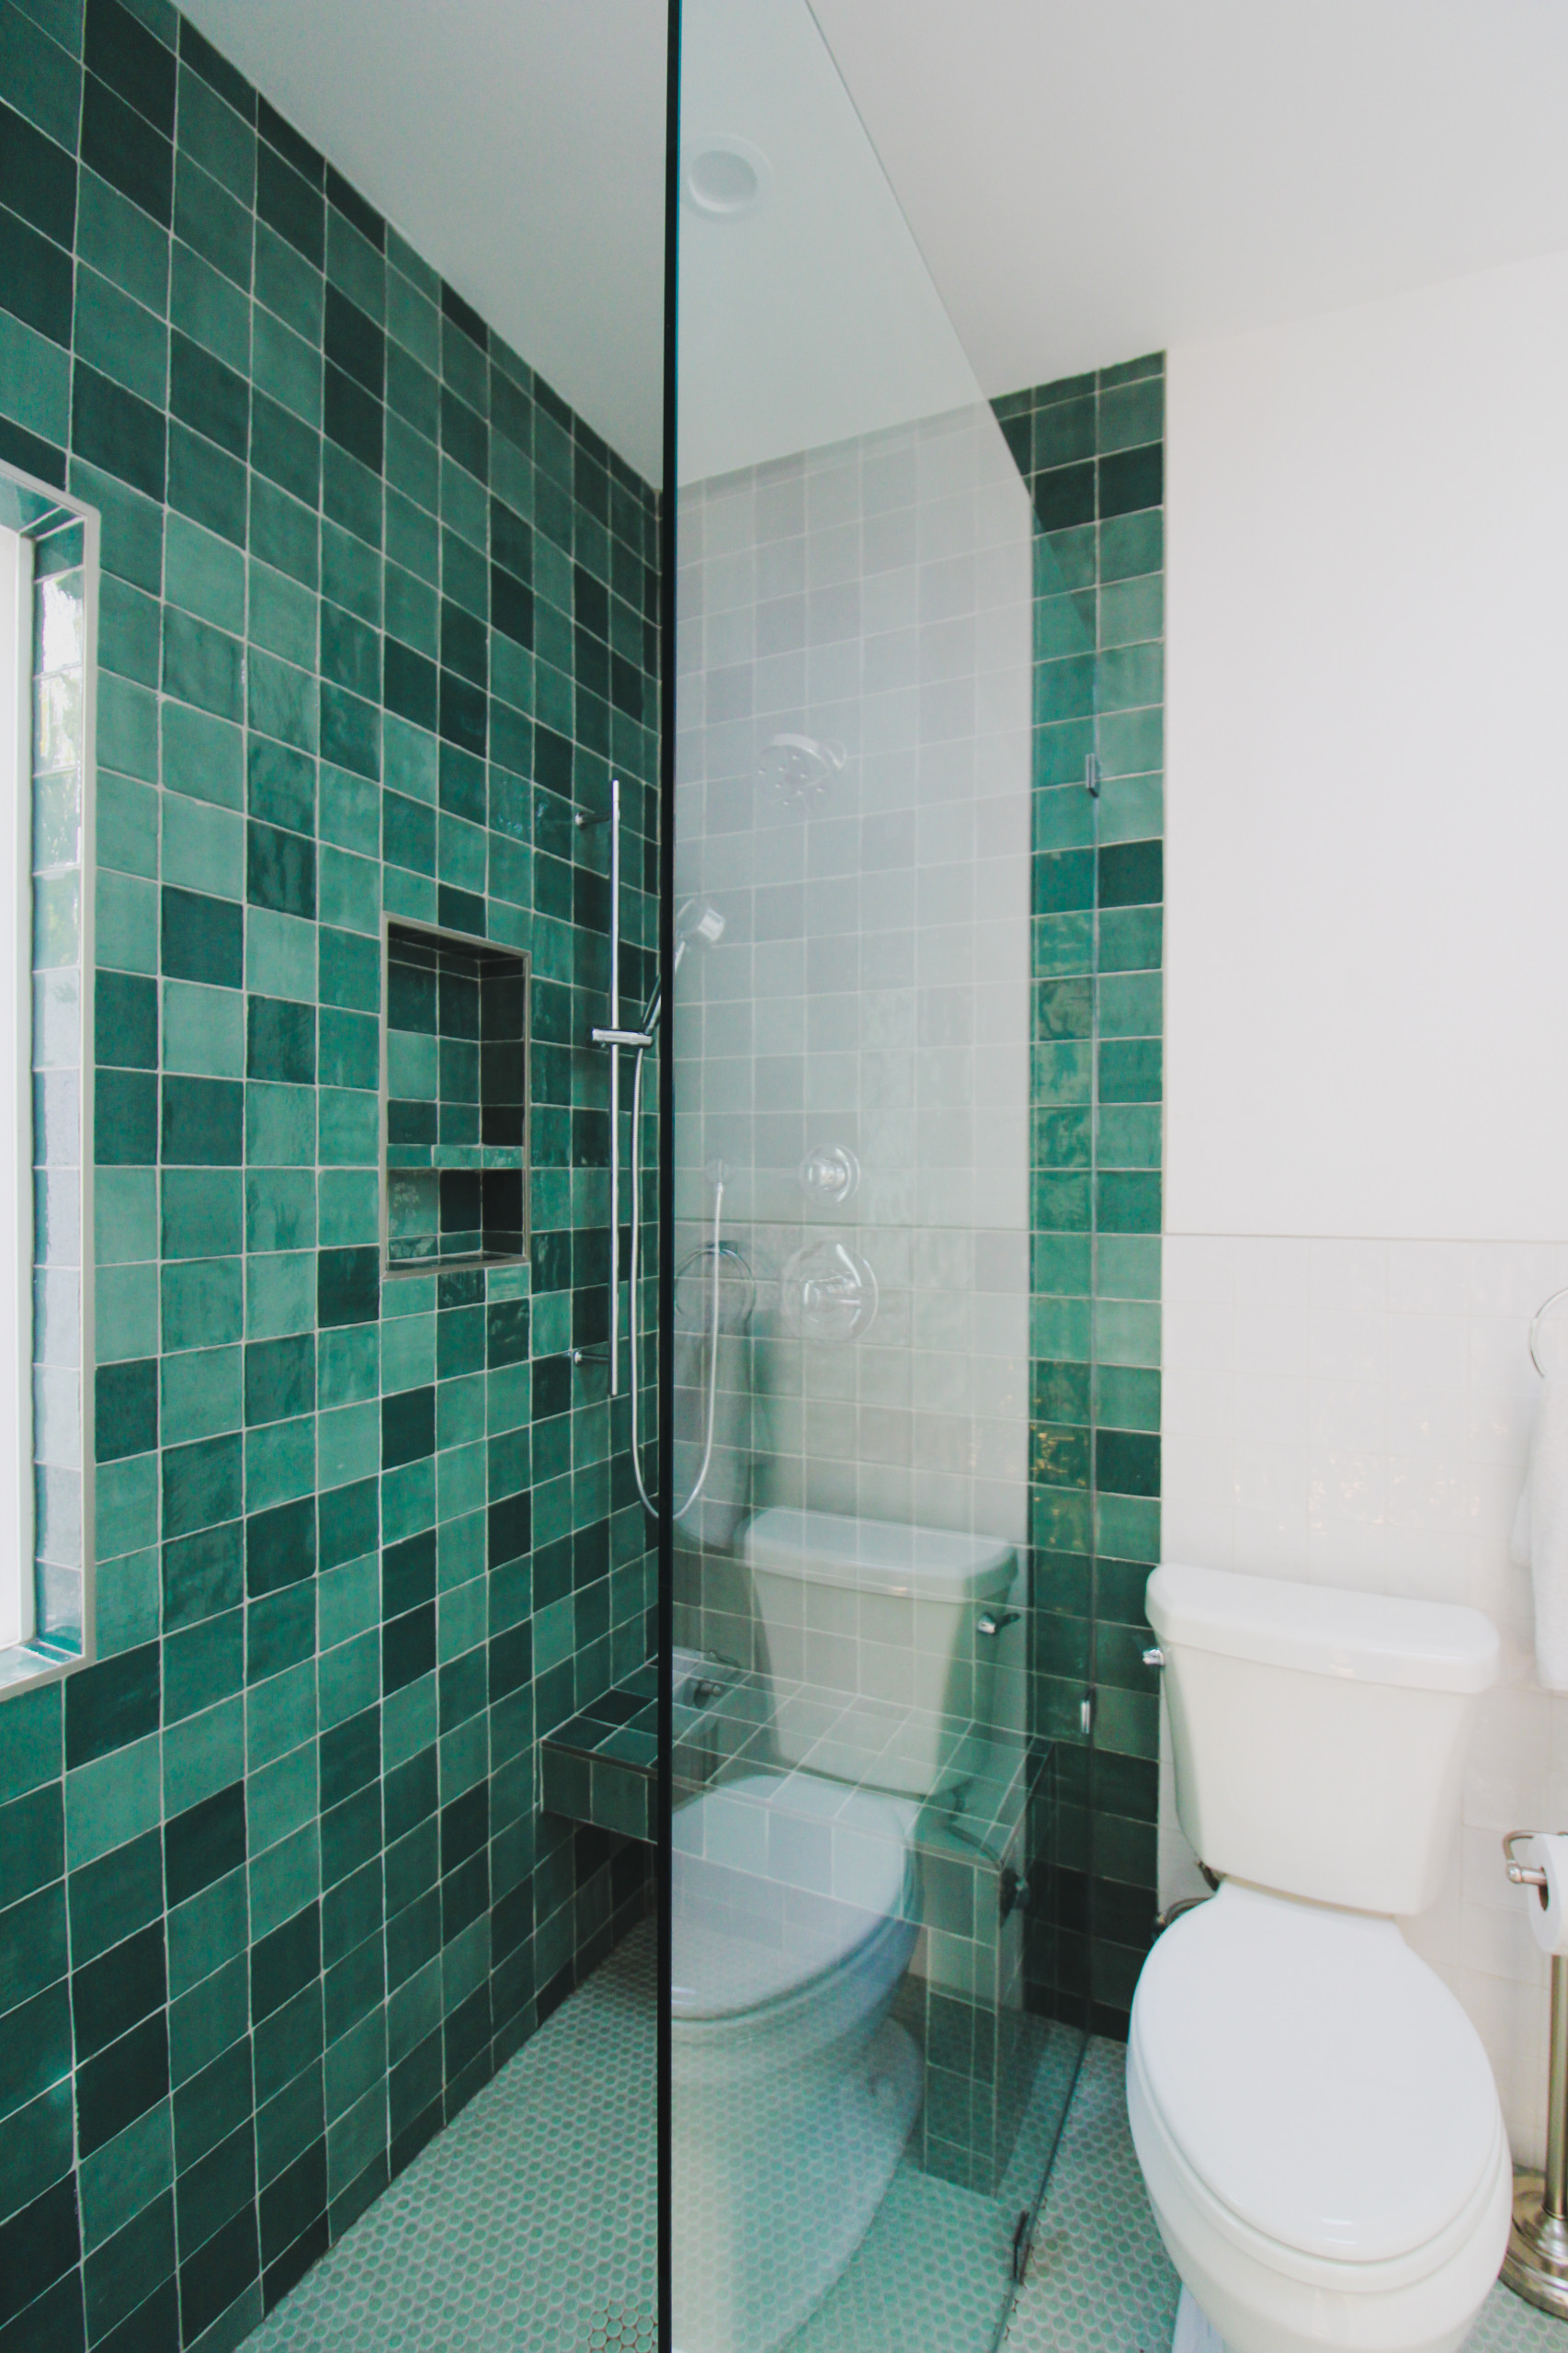 Bathroom in ADU located in in Eagle Rock, CA. Green shower wall tiles with gray mosaic styled shower floor tiles. The clear glass shower has a boarderless frame and is completed with a niche for all o